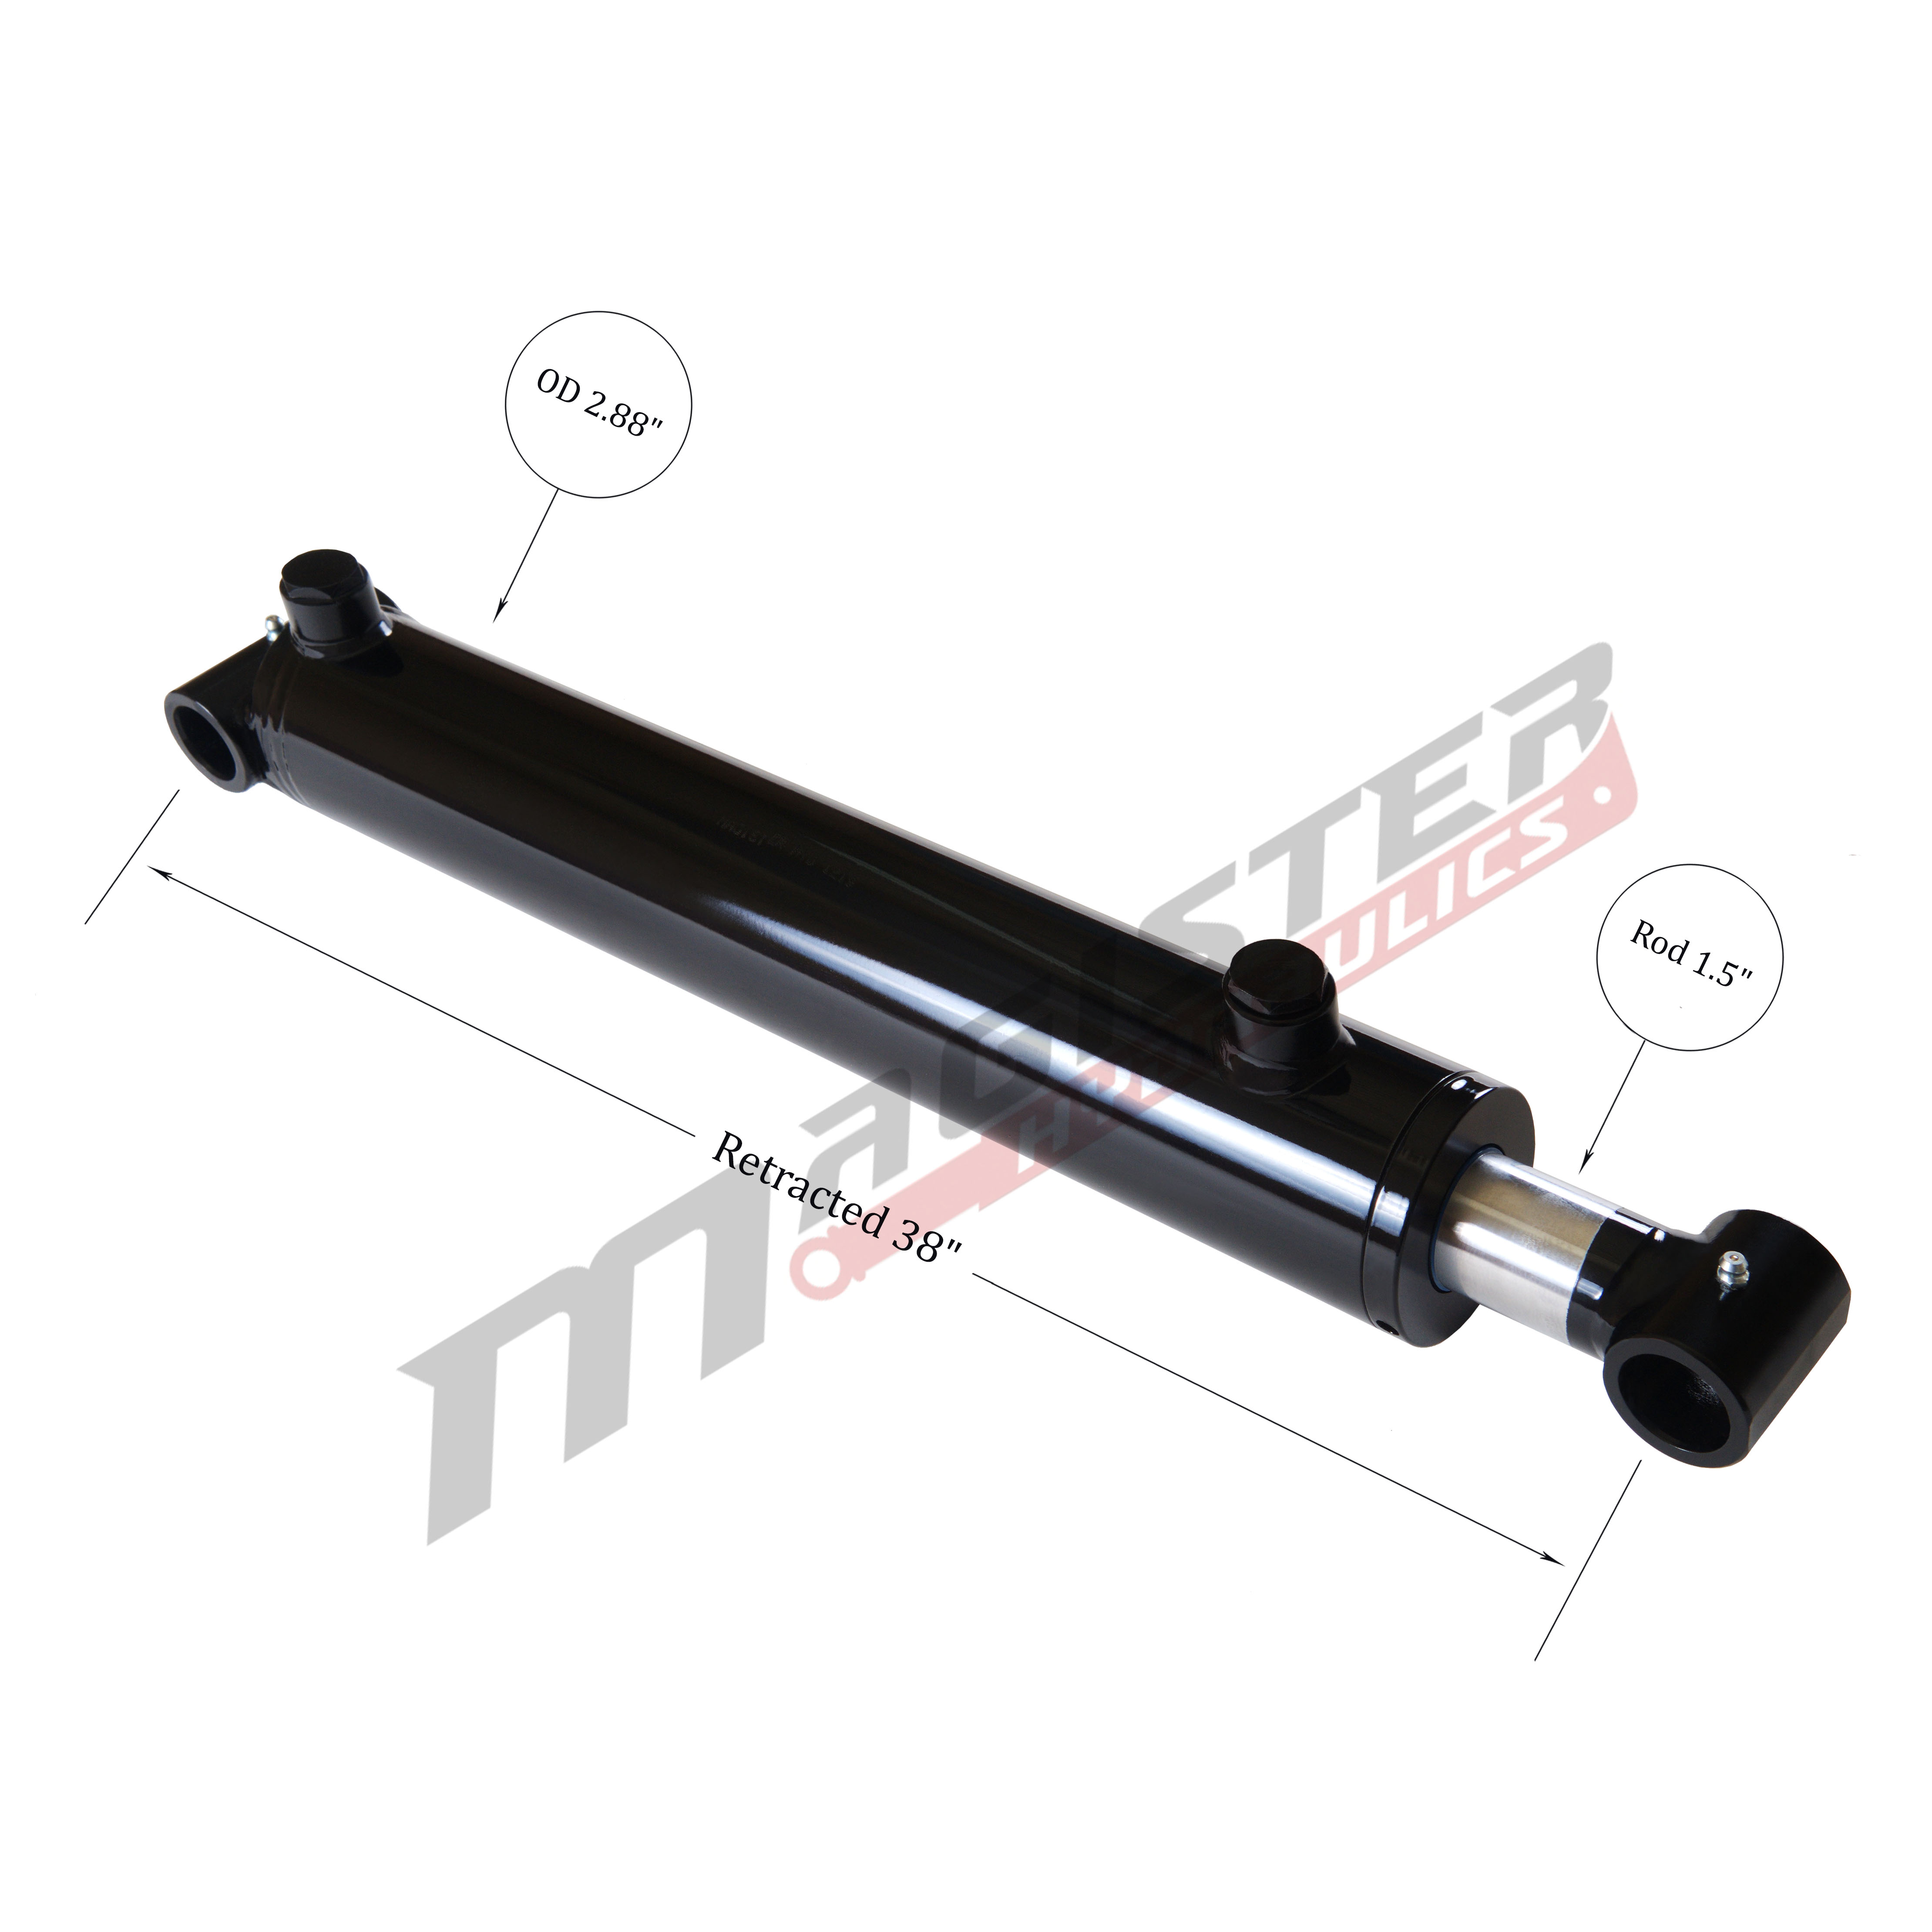 2.5 bore x 30 stroke hydraulic cylinder, welded cross tube double acting cylinder | Magister Hydraulics